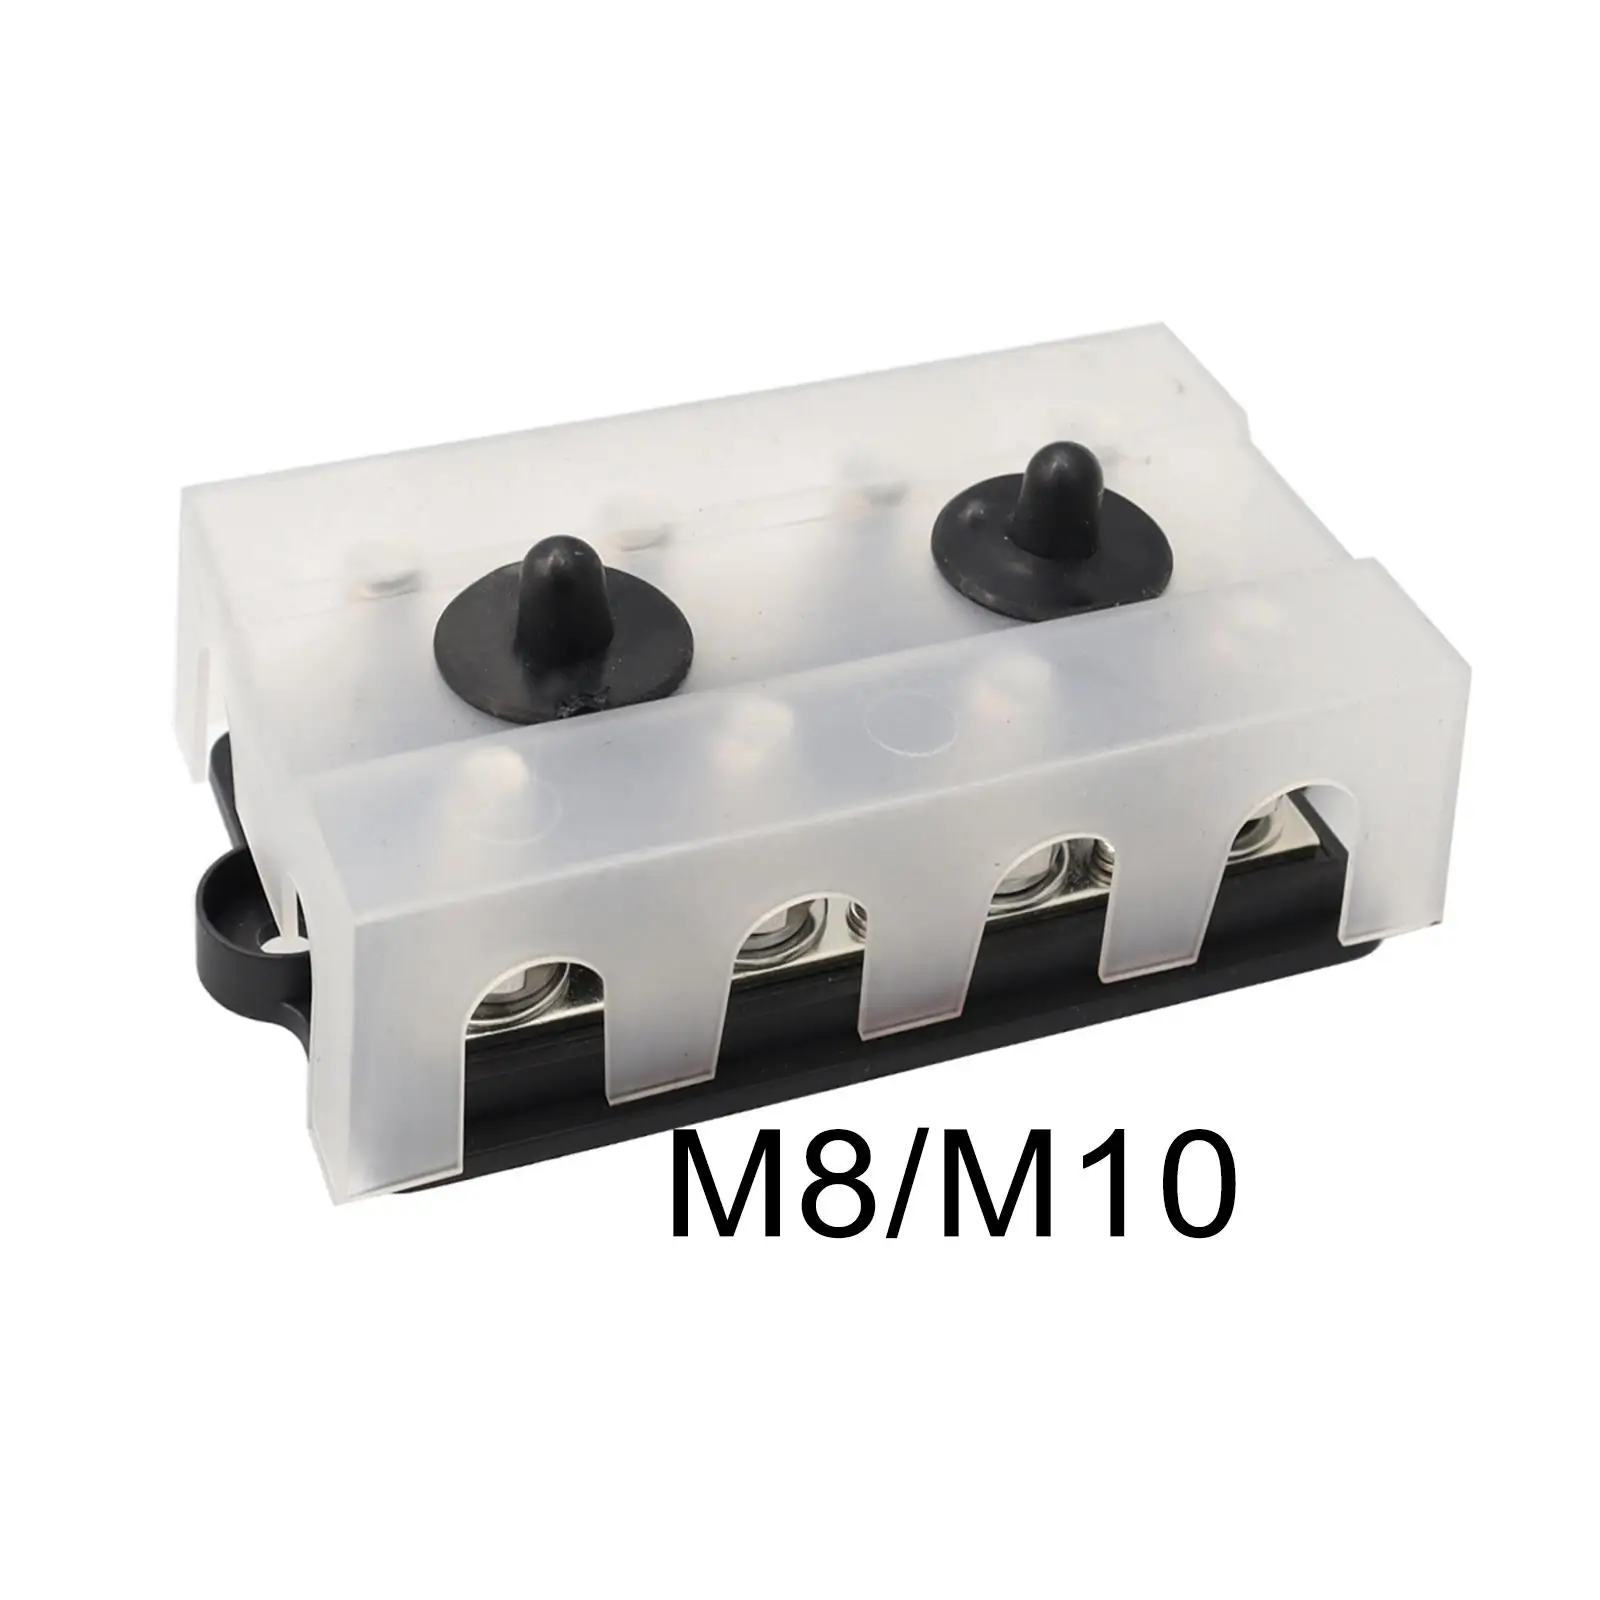 Power Distribution Block  with Cover Heavy Duty 48V 150 Amp Bus Bar Busbar for Boat Trailer Car Vehicles RV